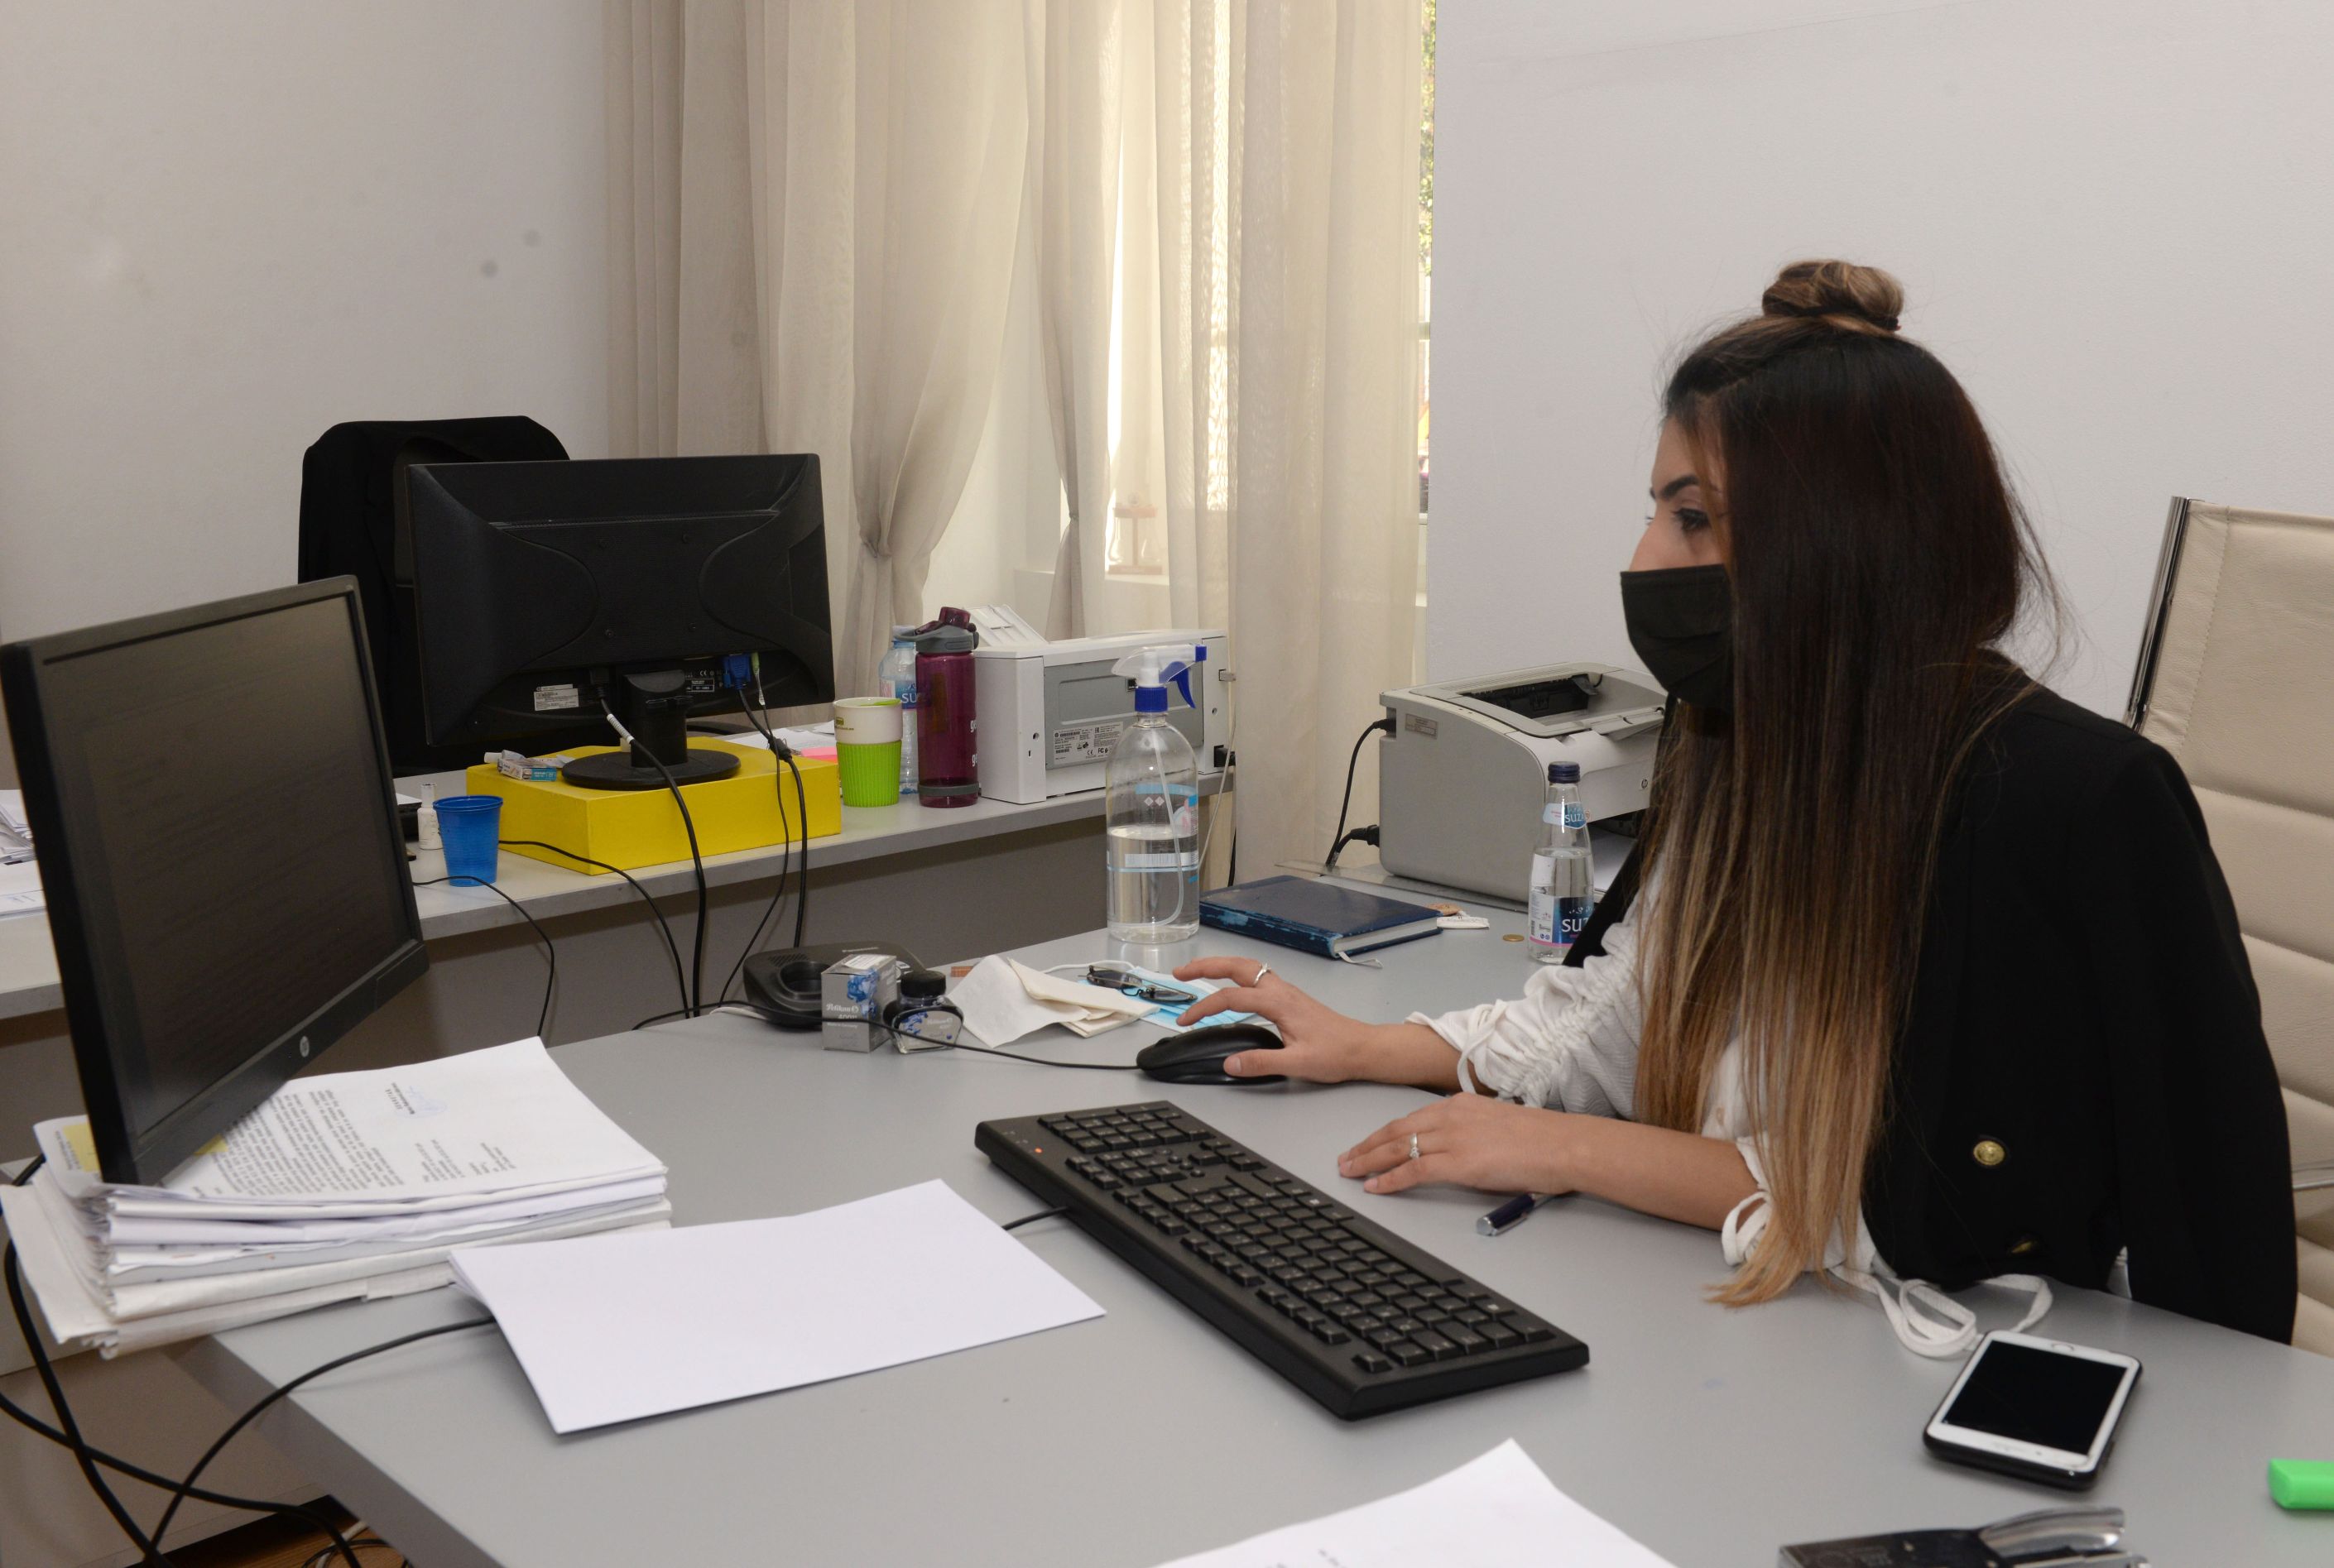 REopen Doors project: Young Roma and Egyptians show high level of knowledge and skills during internship in the Capital